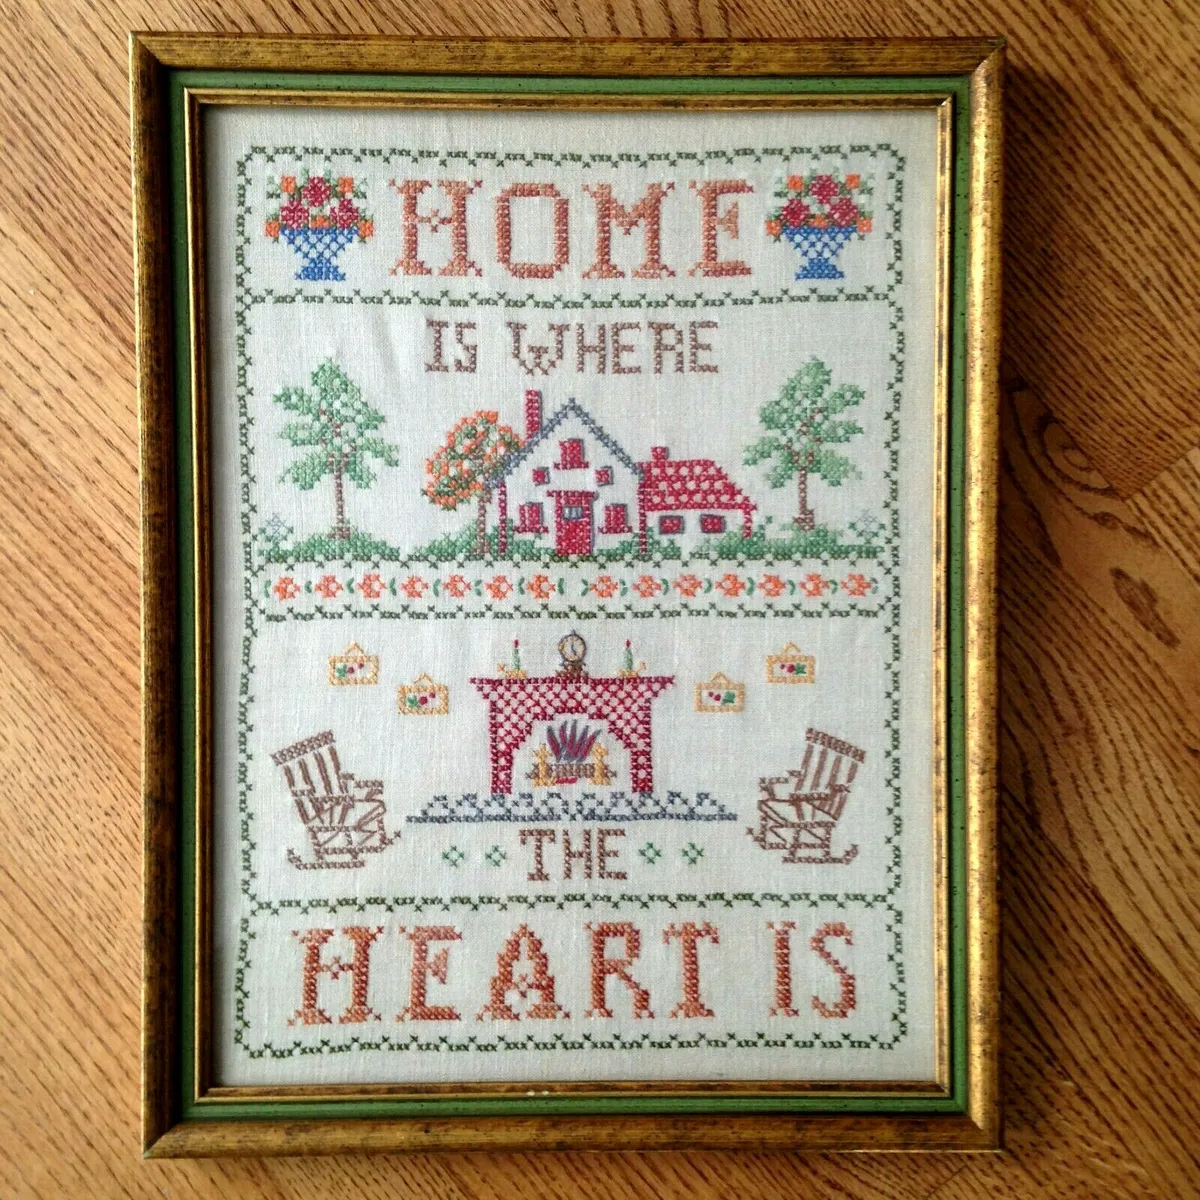 Vintage Framed Home Is Where The Heart Is Cross Stitch